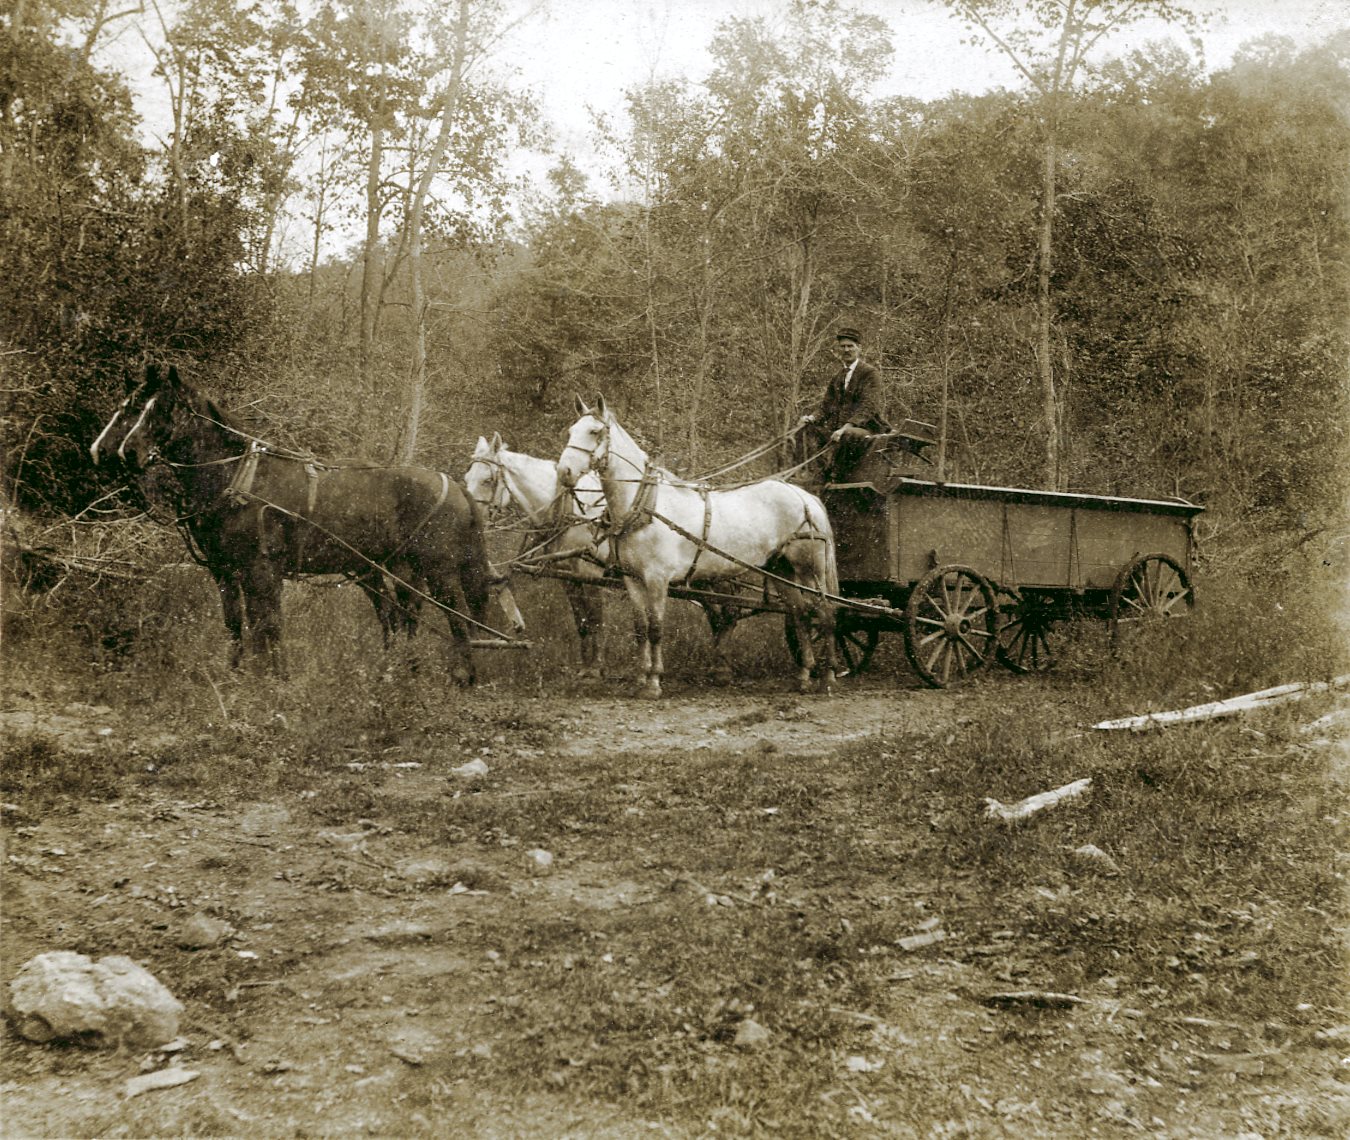 Unknown Man on Ore Wagon with Four Horses Pulling, Somewhere Among Trees in Cripple Creek